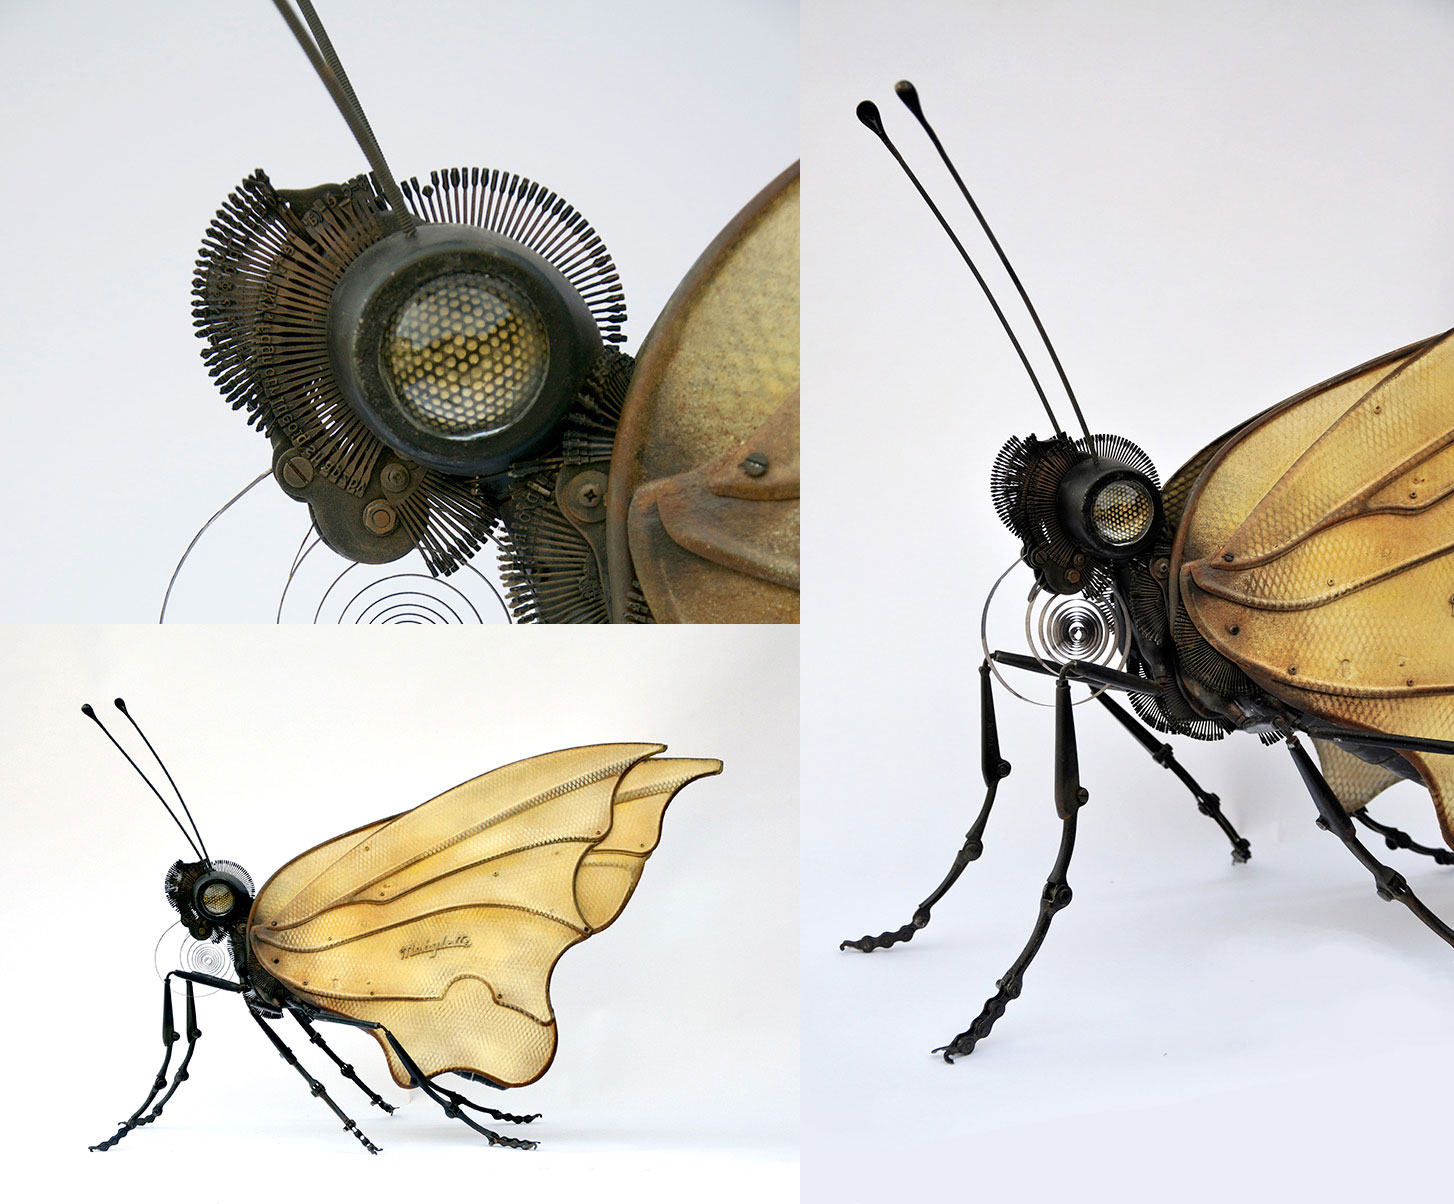 "Butteryfly", . Legs: bike brake parts, pieces of windshield wipers, bike chains. Abdomen: old acetylene light tank. Thorax: car suspension part, small spoon parts, cream chargers. Head: headlights, bike parts. Butterfly trunk: clock springs. Hair: pieces of a typewriter daisy wheel. Antennae: brake cables, drawer knobs.